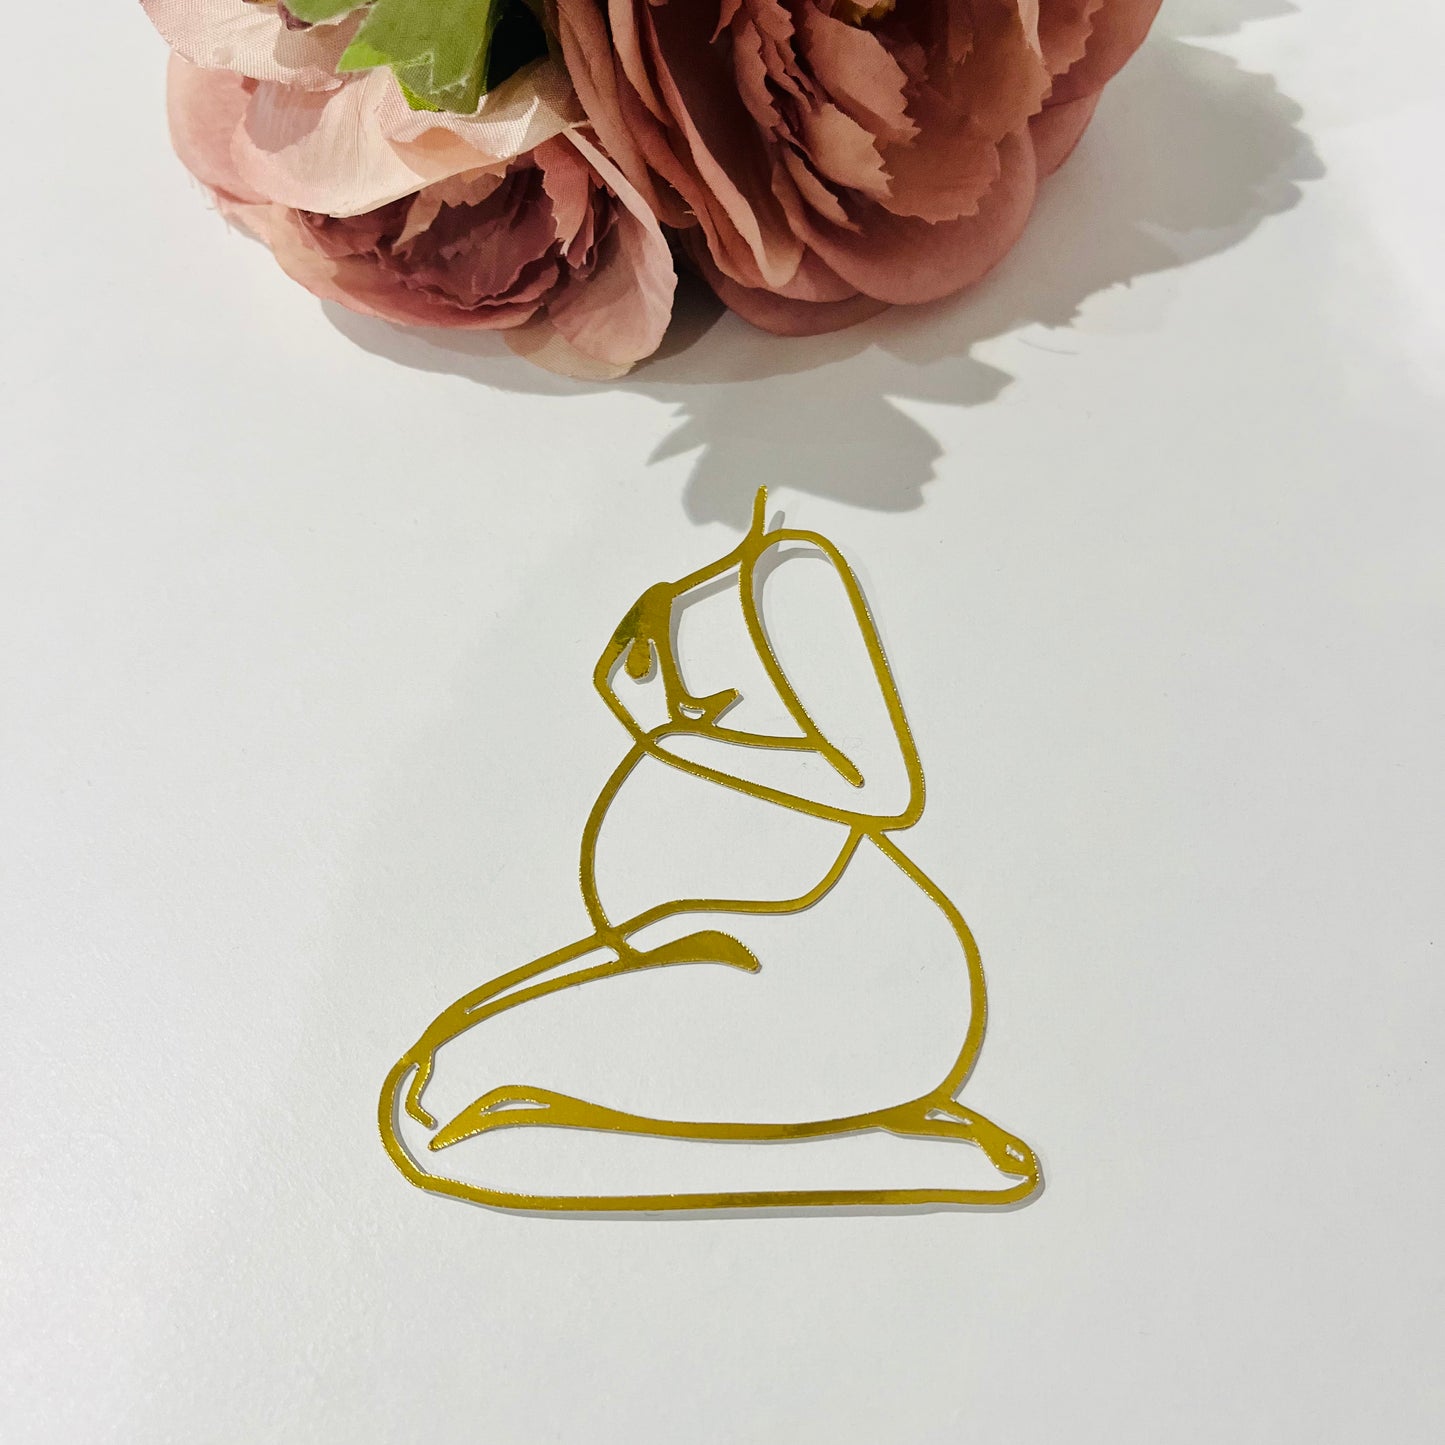 Line Art Pregnant Lady Silhouette Cardstock Cake Charm